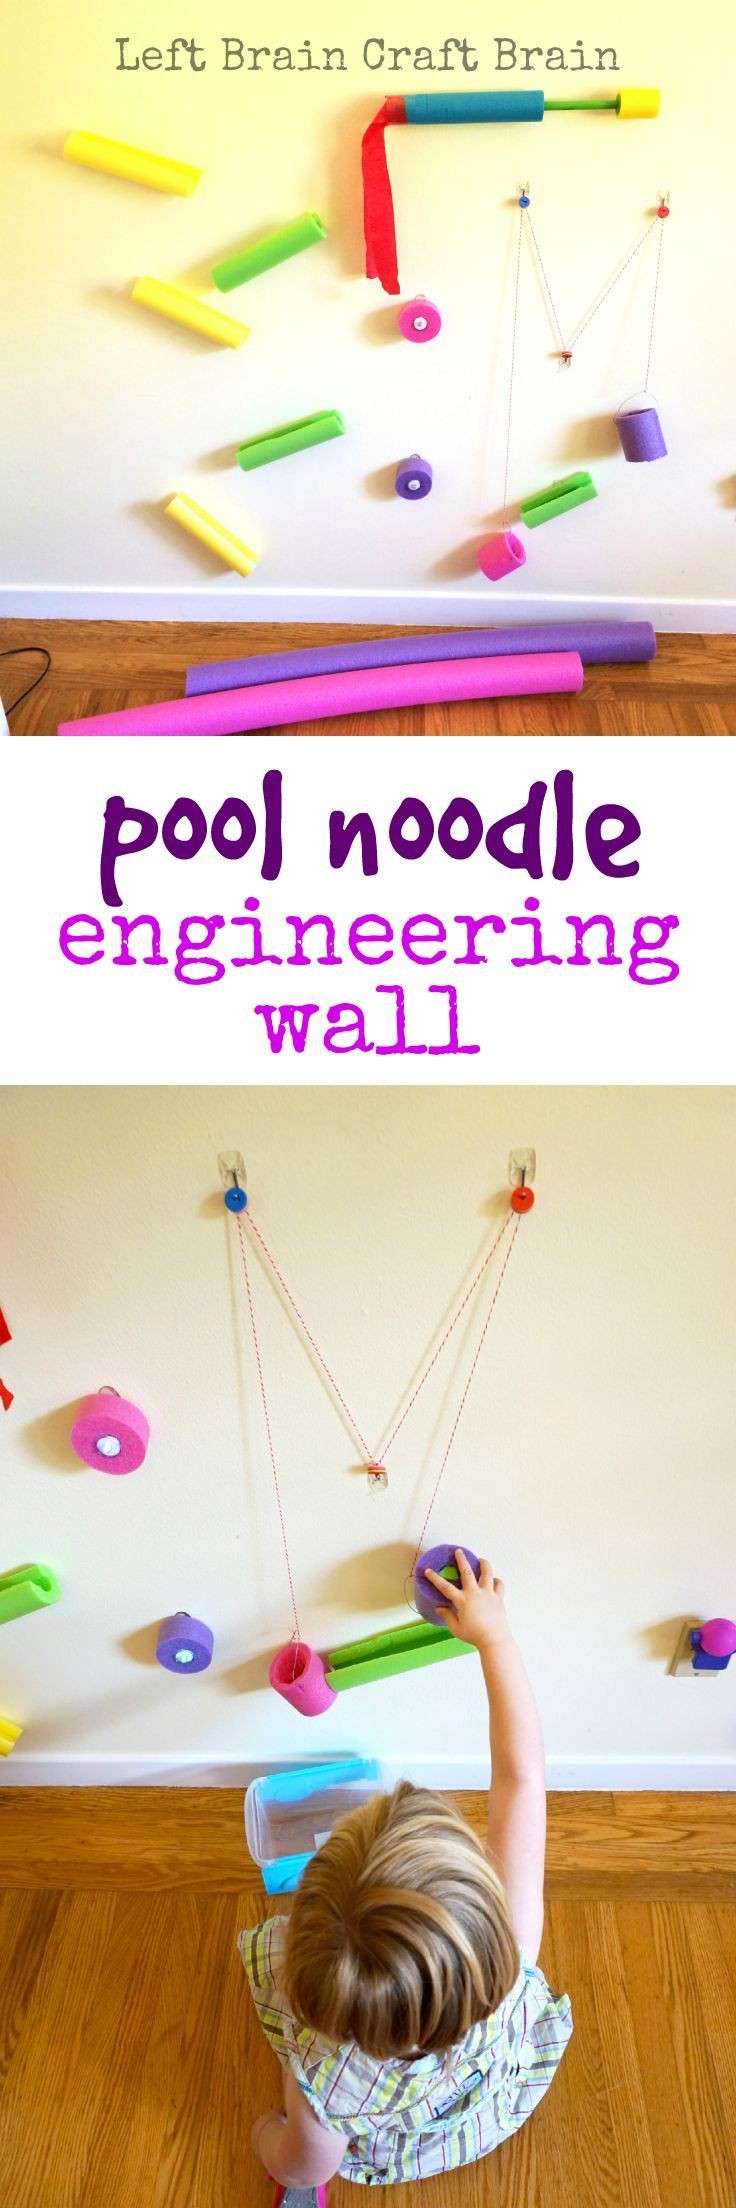 Inspire your young engineers with this fun pool no...